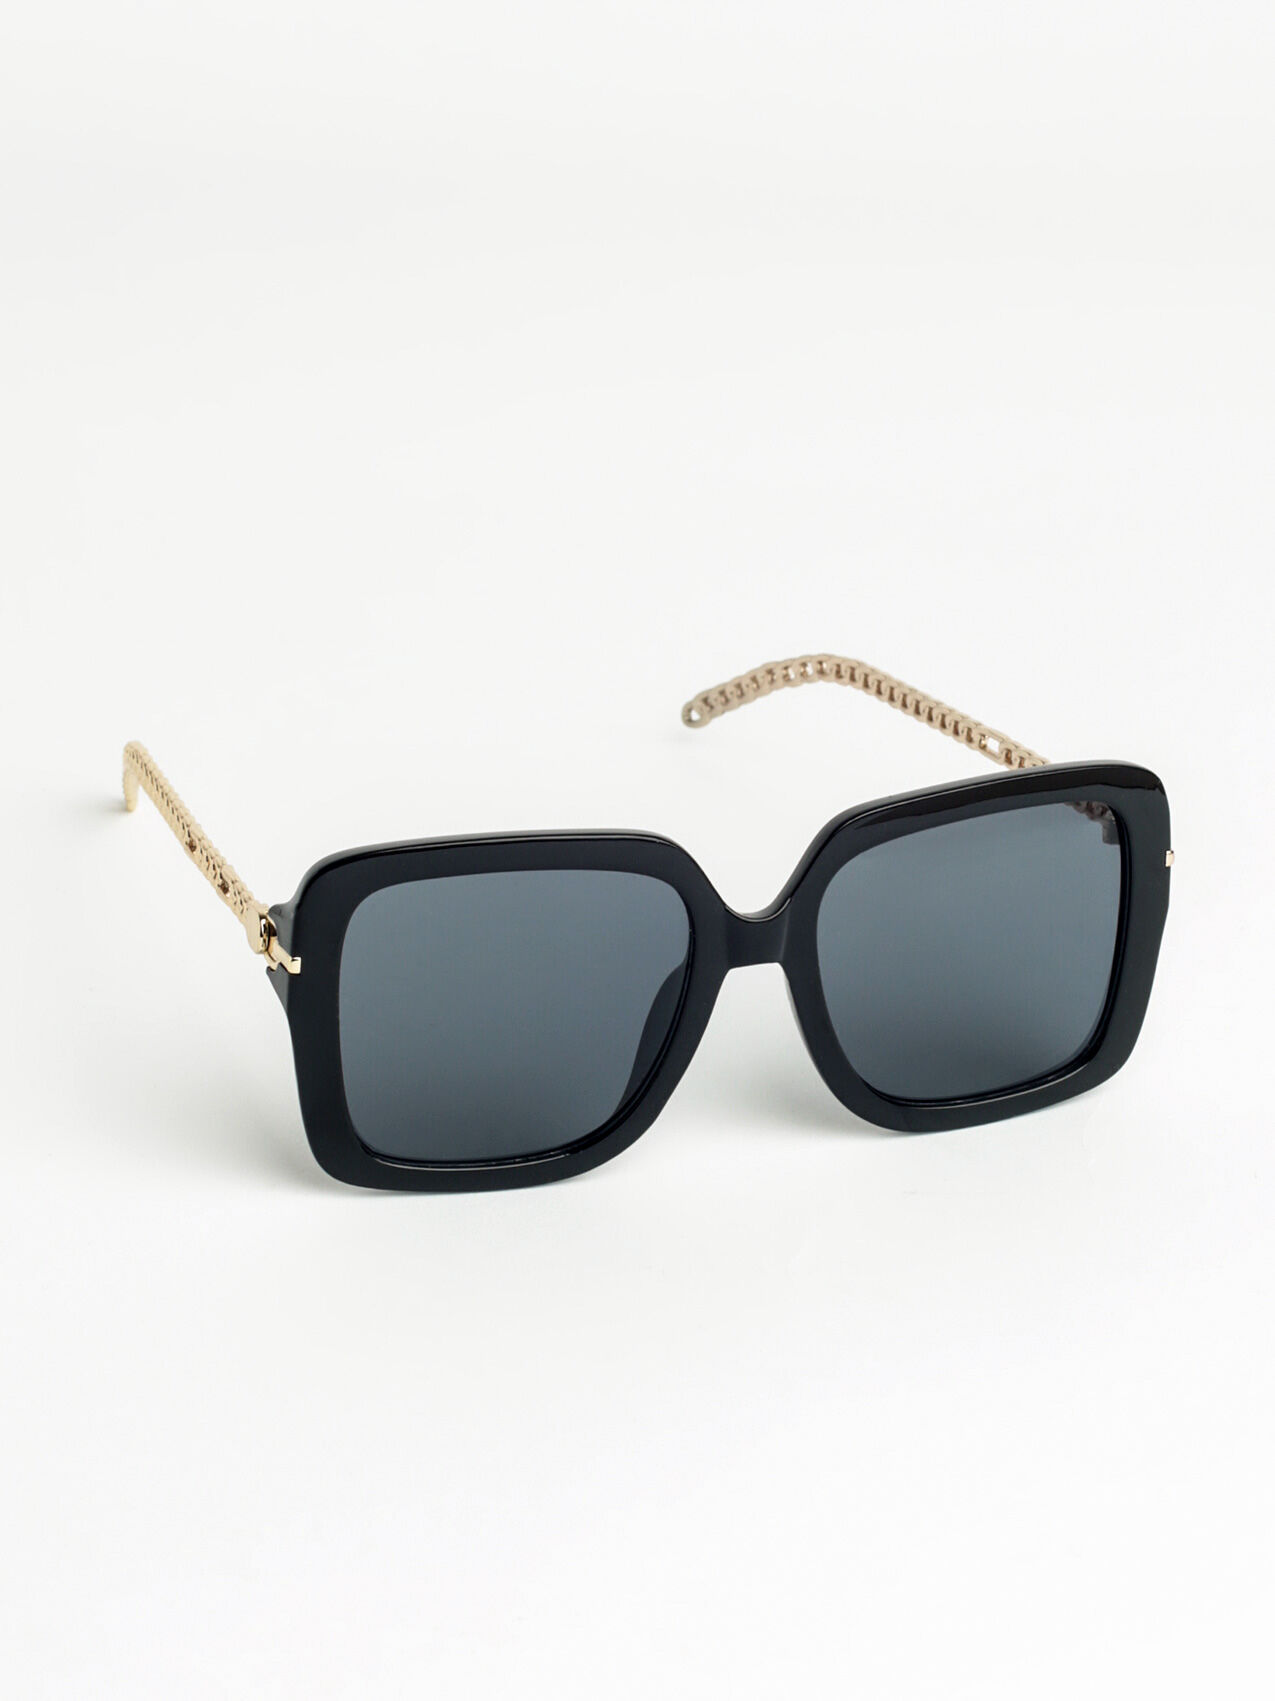 Black Square Frame Sunglasses with Arm Detail